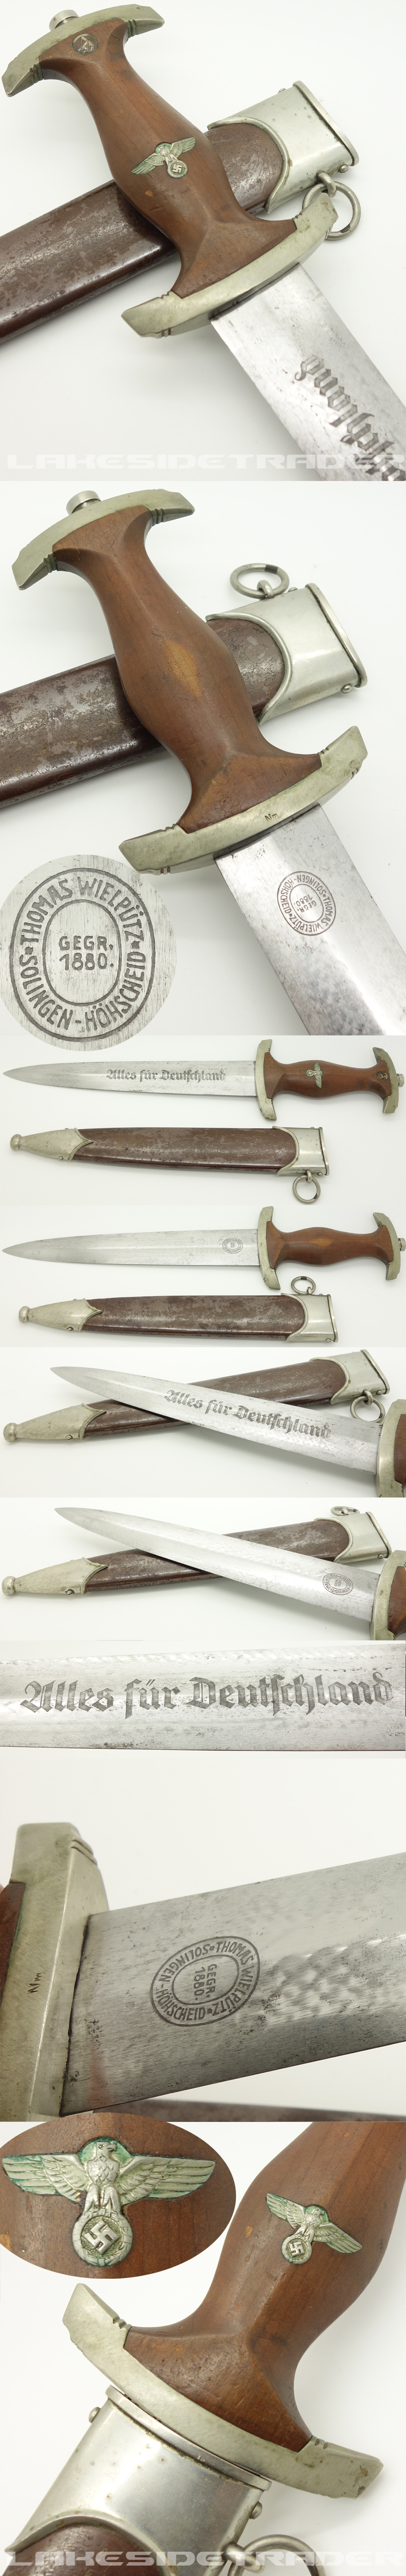 Early SA Dagger by Thomas Wielputz with a unique blade